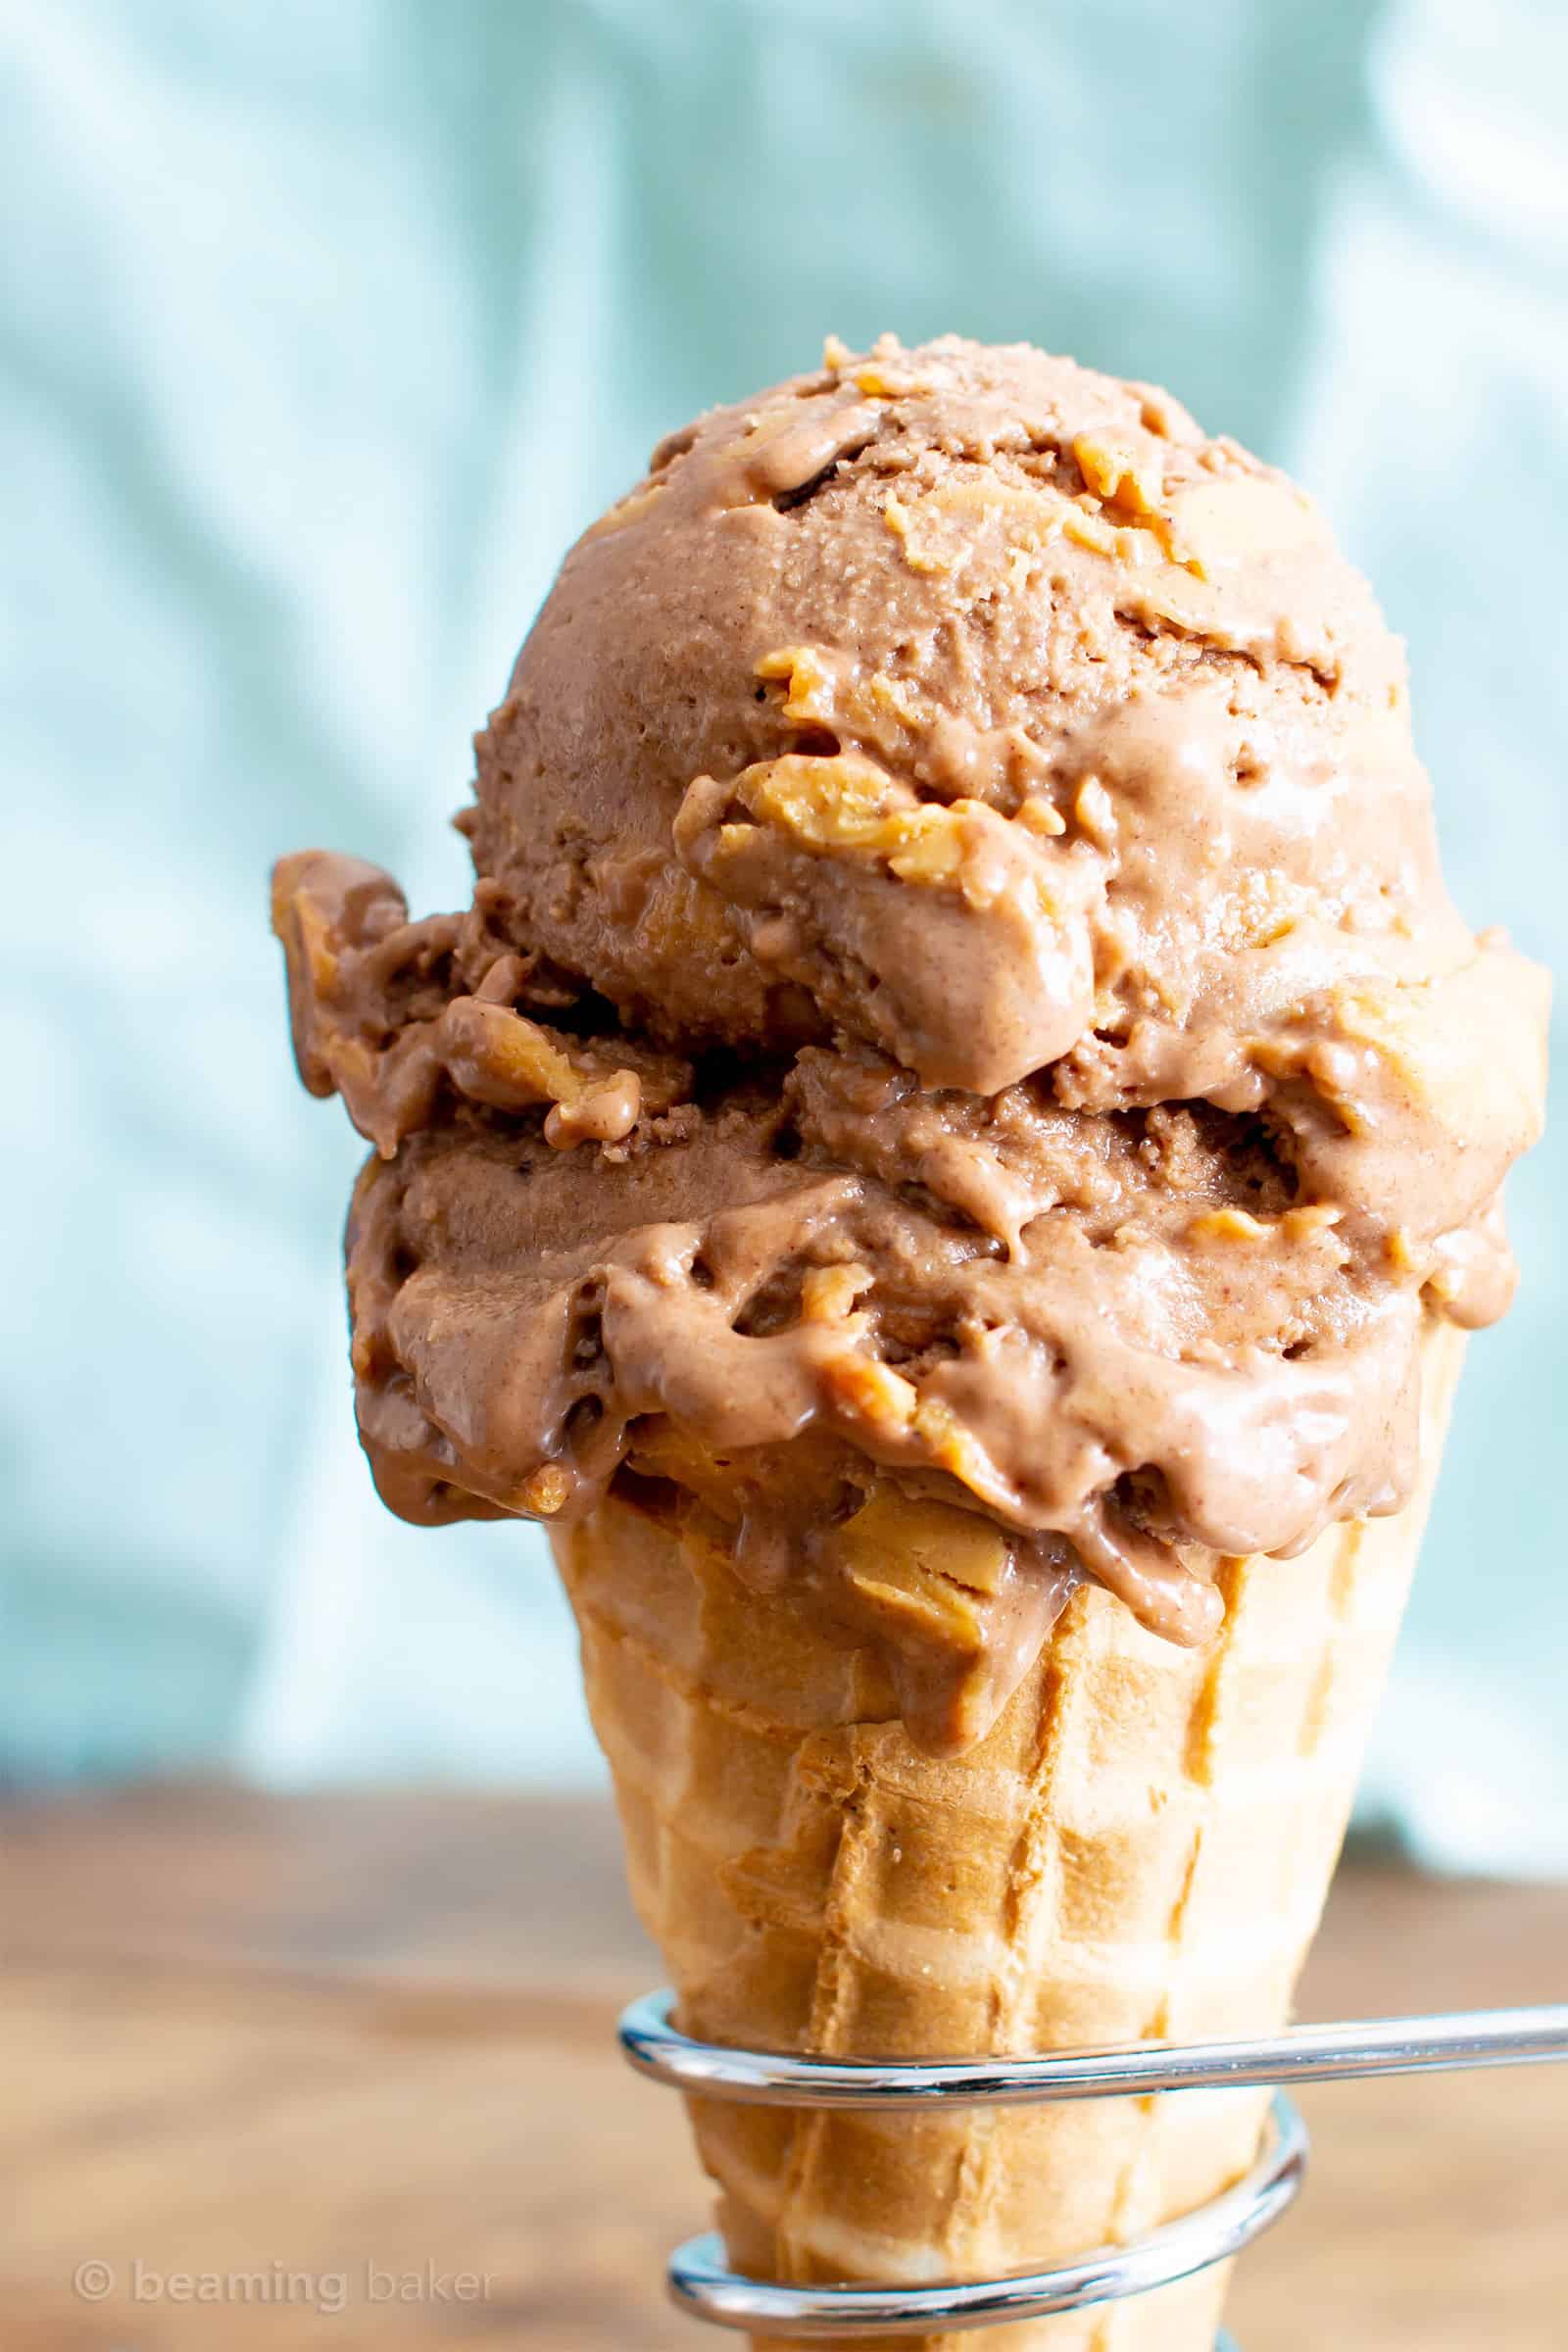 Healthy No Sugar Added Chocolate Peanut Butter Ice Cream (V, DF): a super easy, 5-ingredient recipe for the BEST deliciously creamy and chocolatey no churn peanut butter ice cream. #Vegan #DairyFree #IceCream #Paleo option #HealthyDesserts #PeanutButter #NoSugarAdded #Bananas | Recipe at BeamingBaker.com